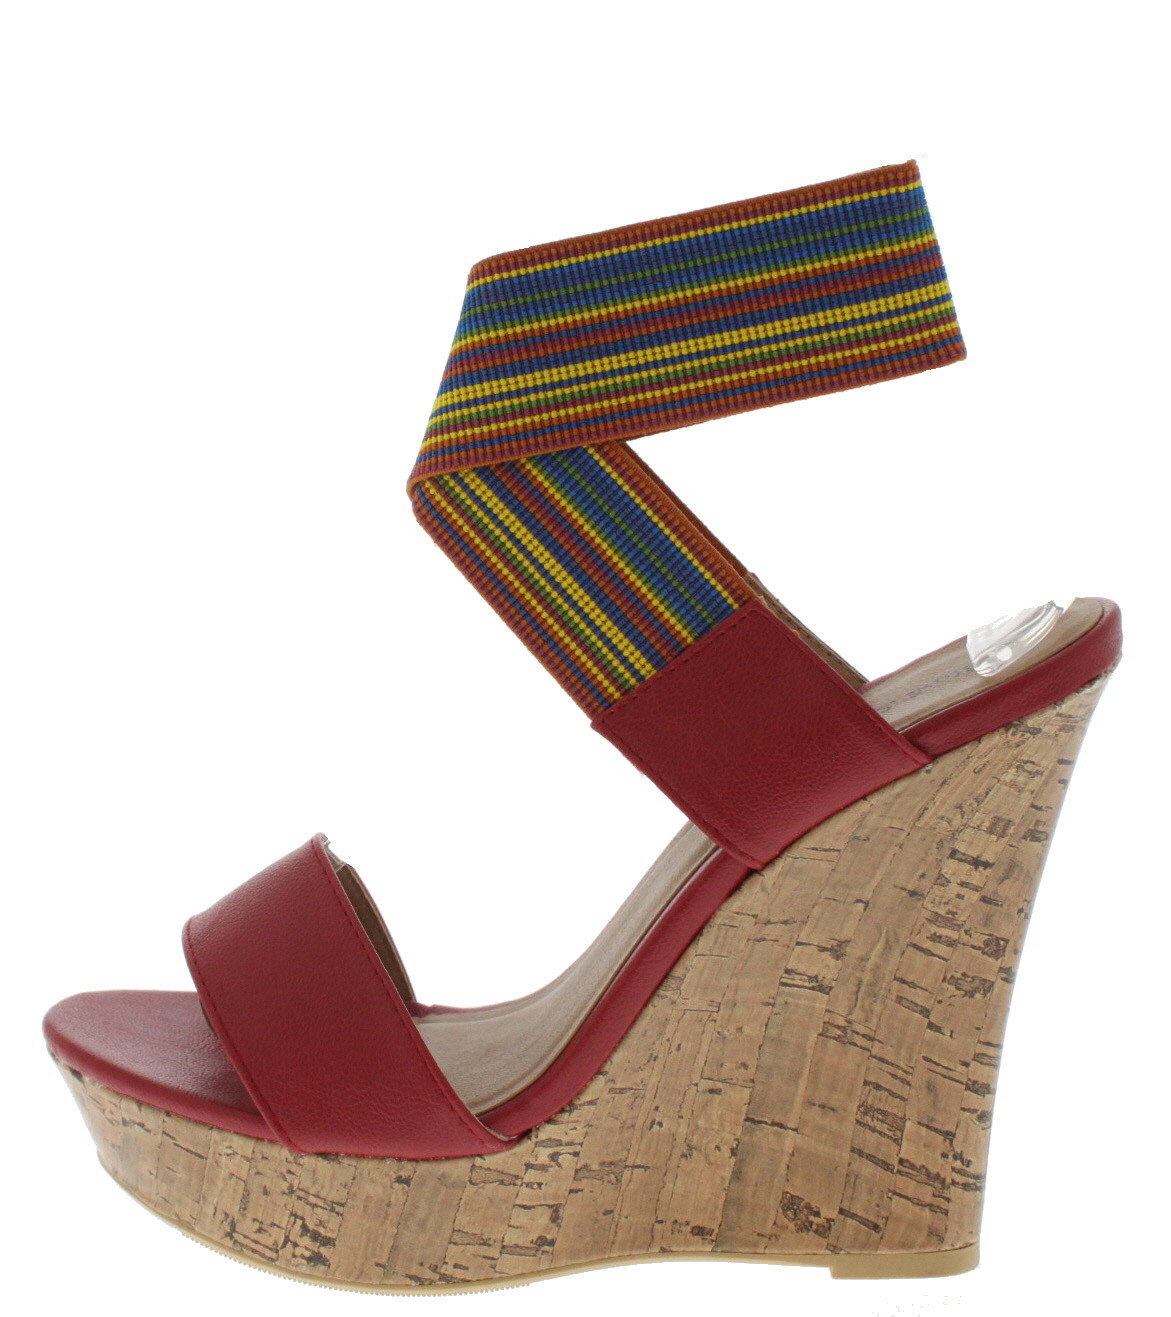 Add a global look to your warm-weather wardrobe with these chic wedges. Cork and contrasting materials on this high heel sandal, great for summer getaways.